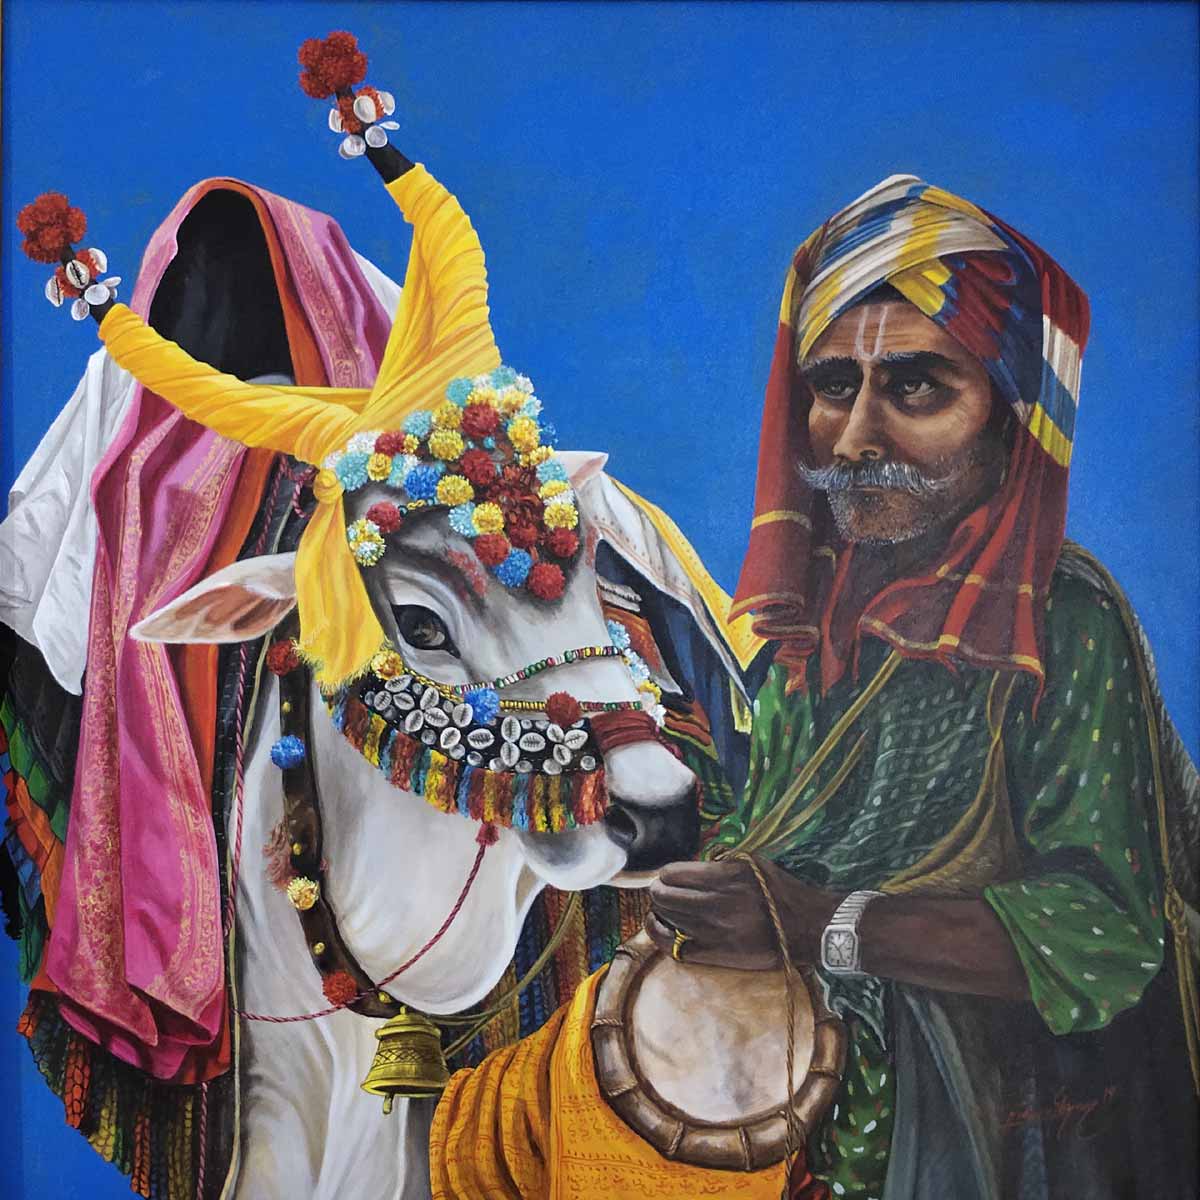 Realism Painting with Acrylic on Canvas "Nandi with Man" art by Ghanshyam Kashyap